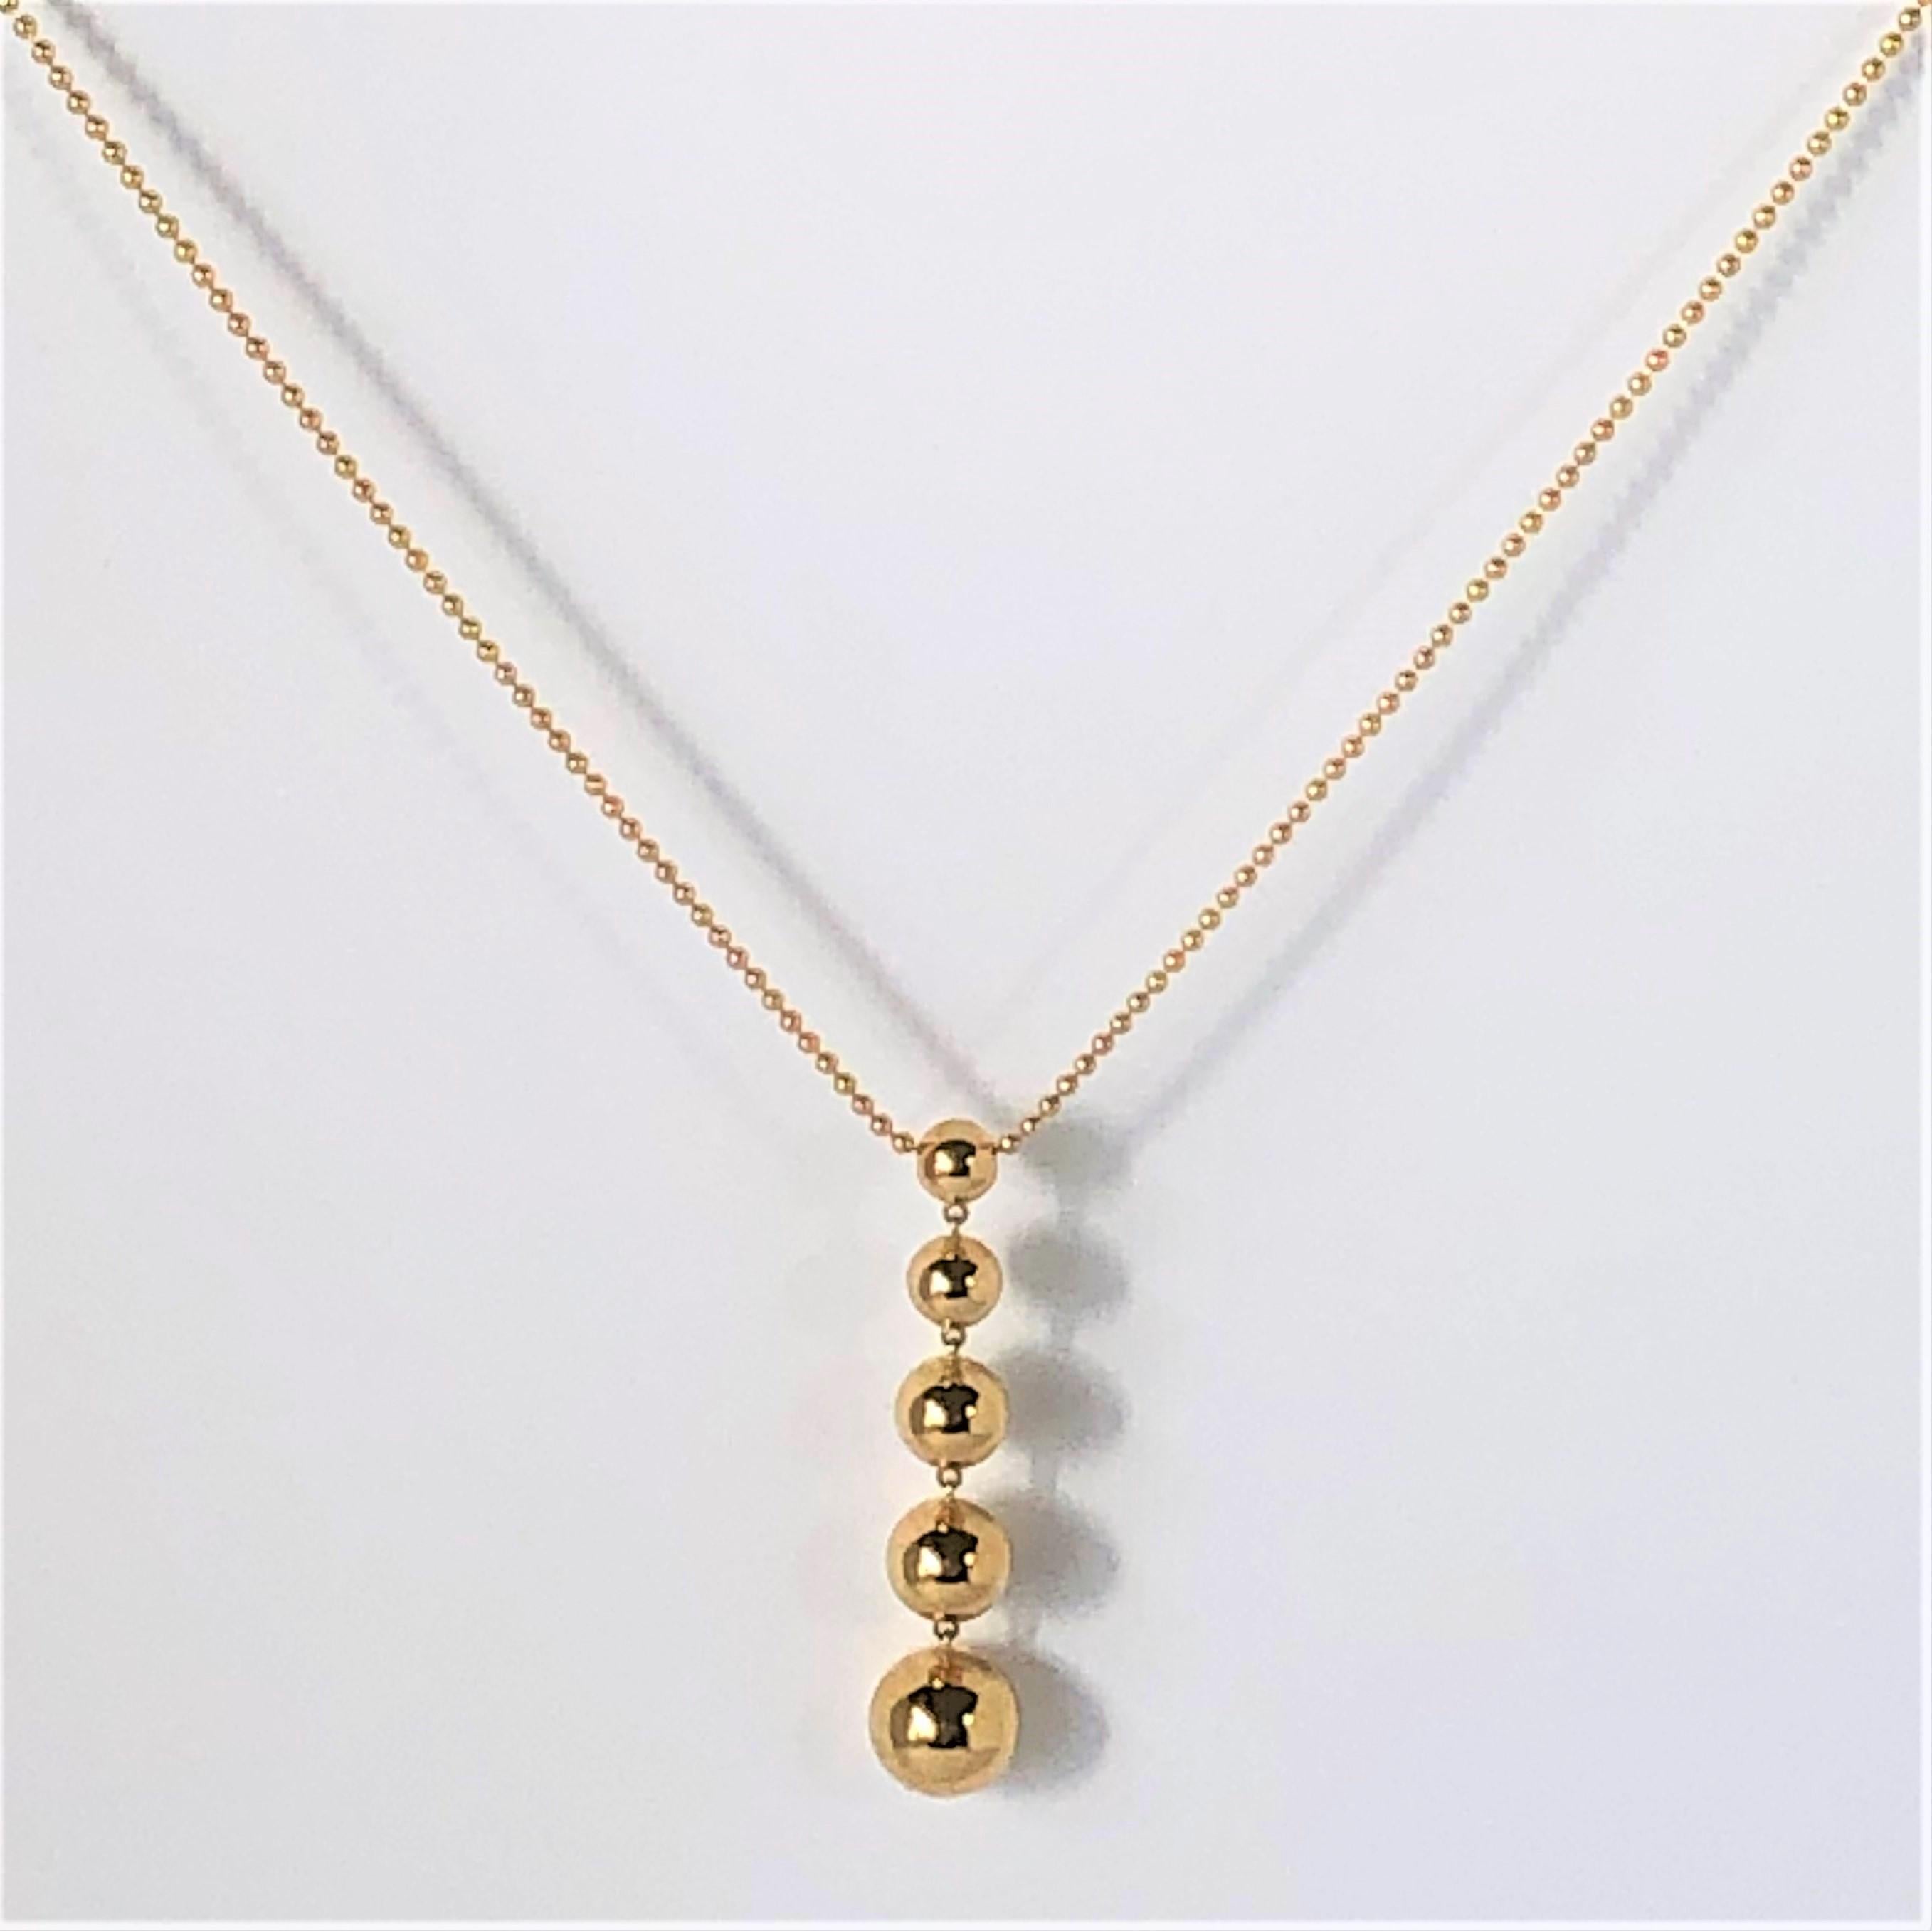 Made by Tiffany & Co, this wearable, great, every day 18K yellow gold necklace
is ideal for women of all ages. The necklace measures 16 inches long and the 5 ball pendant measures just over 1 7/8 inch long. The gold balls graduate from 10mm